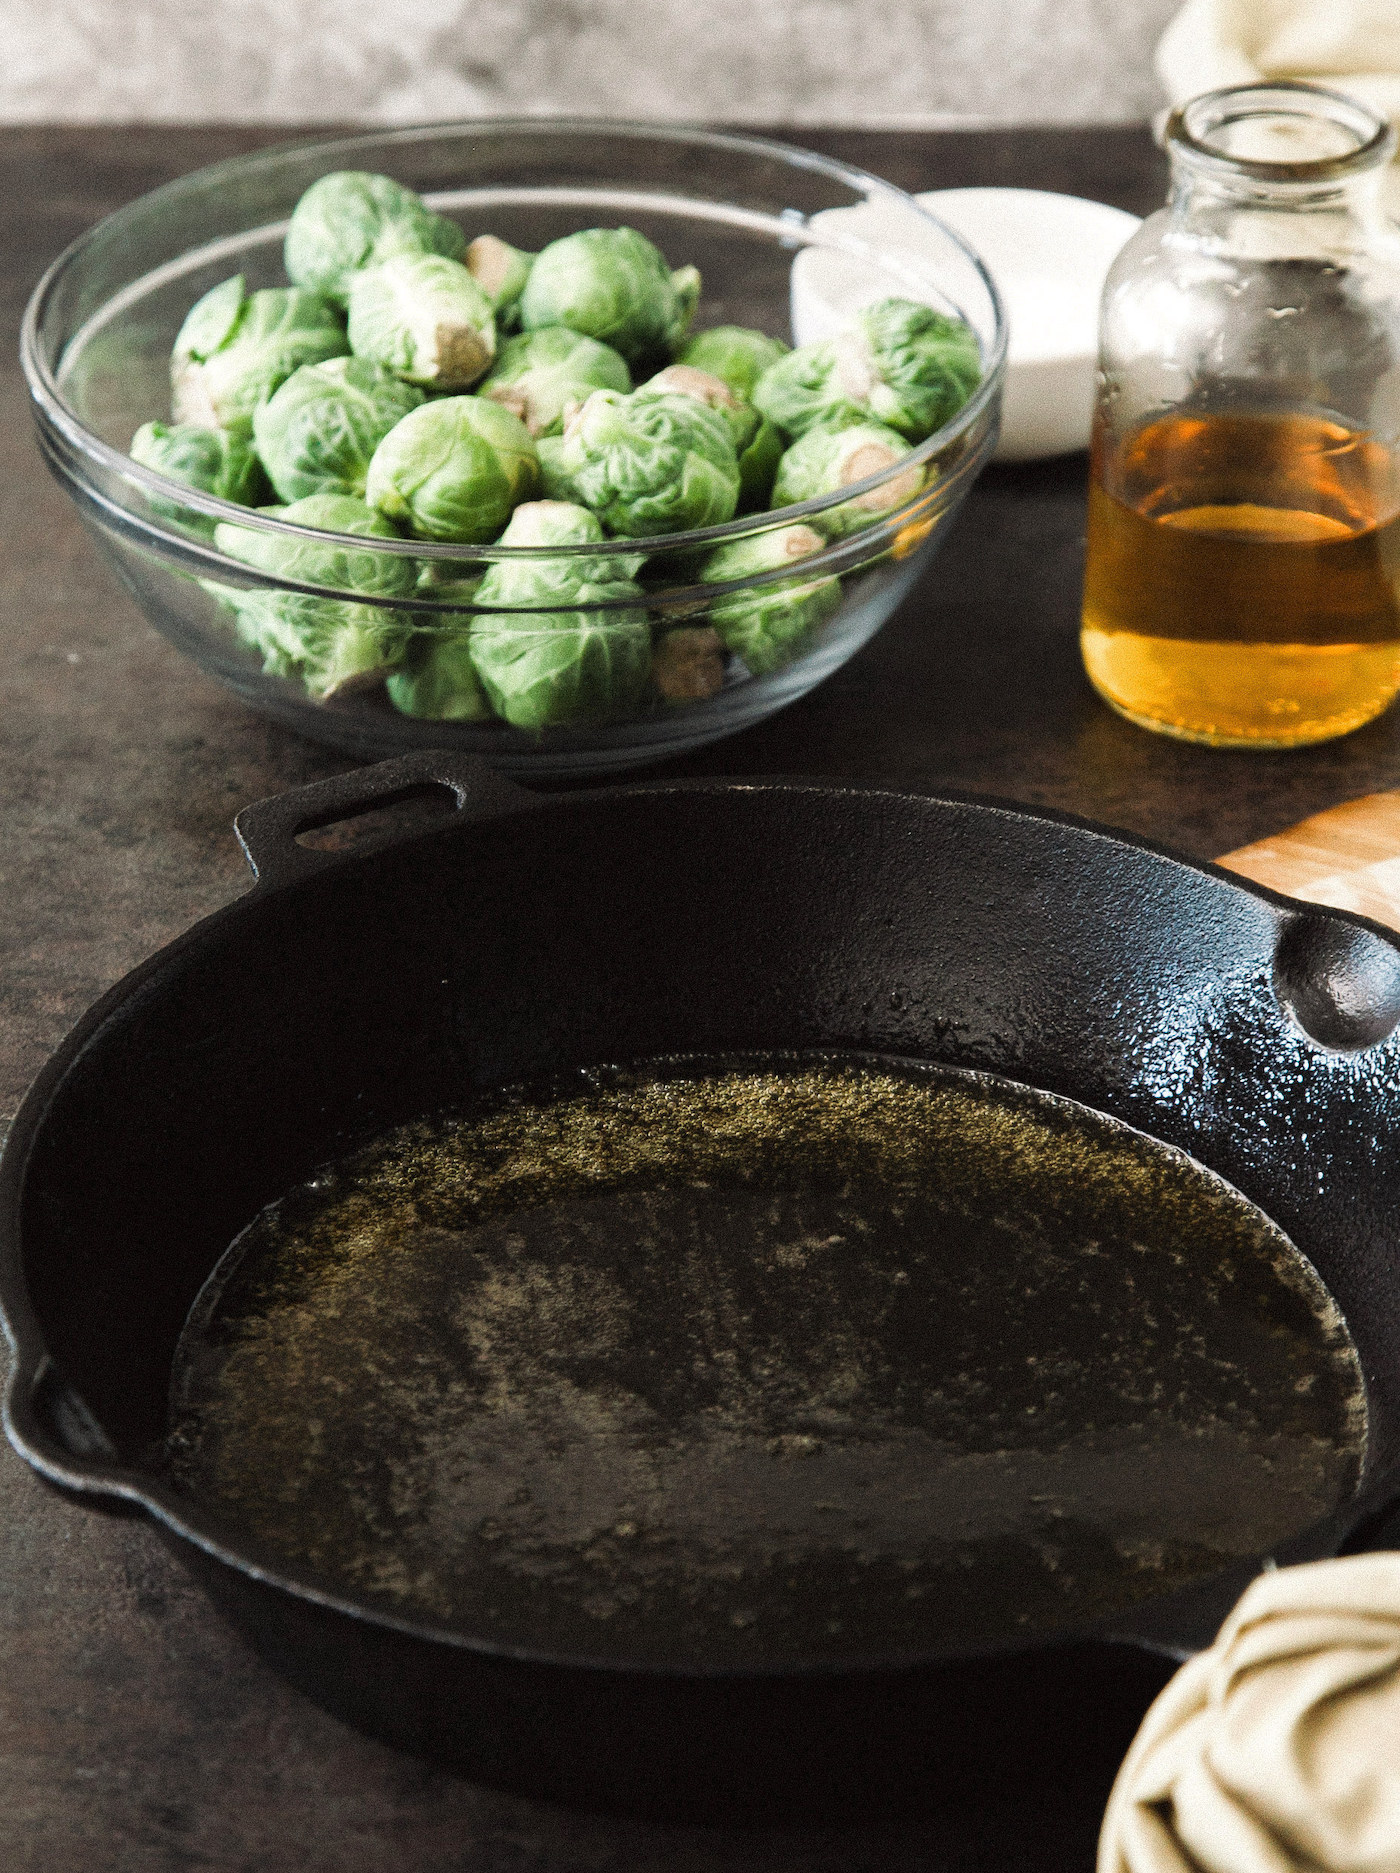 Adding brussels sprouts to the cast iron pan